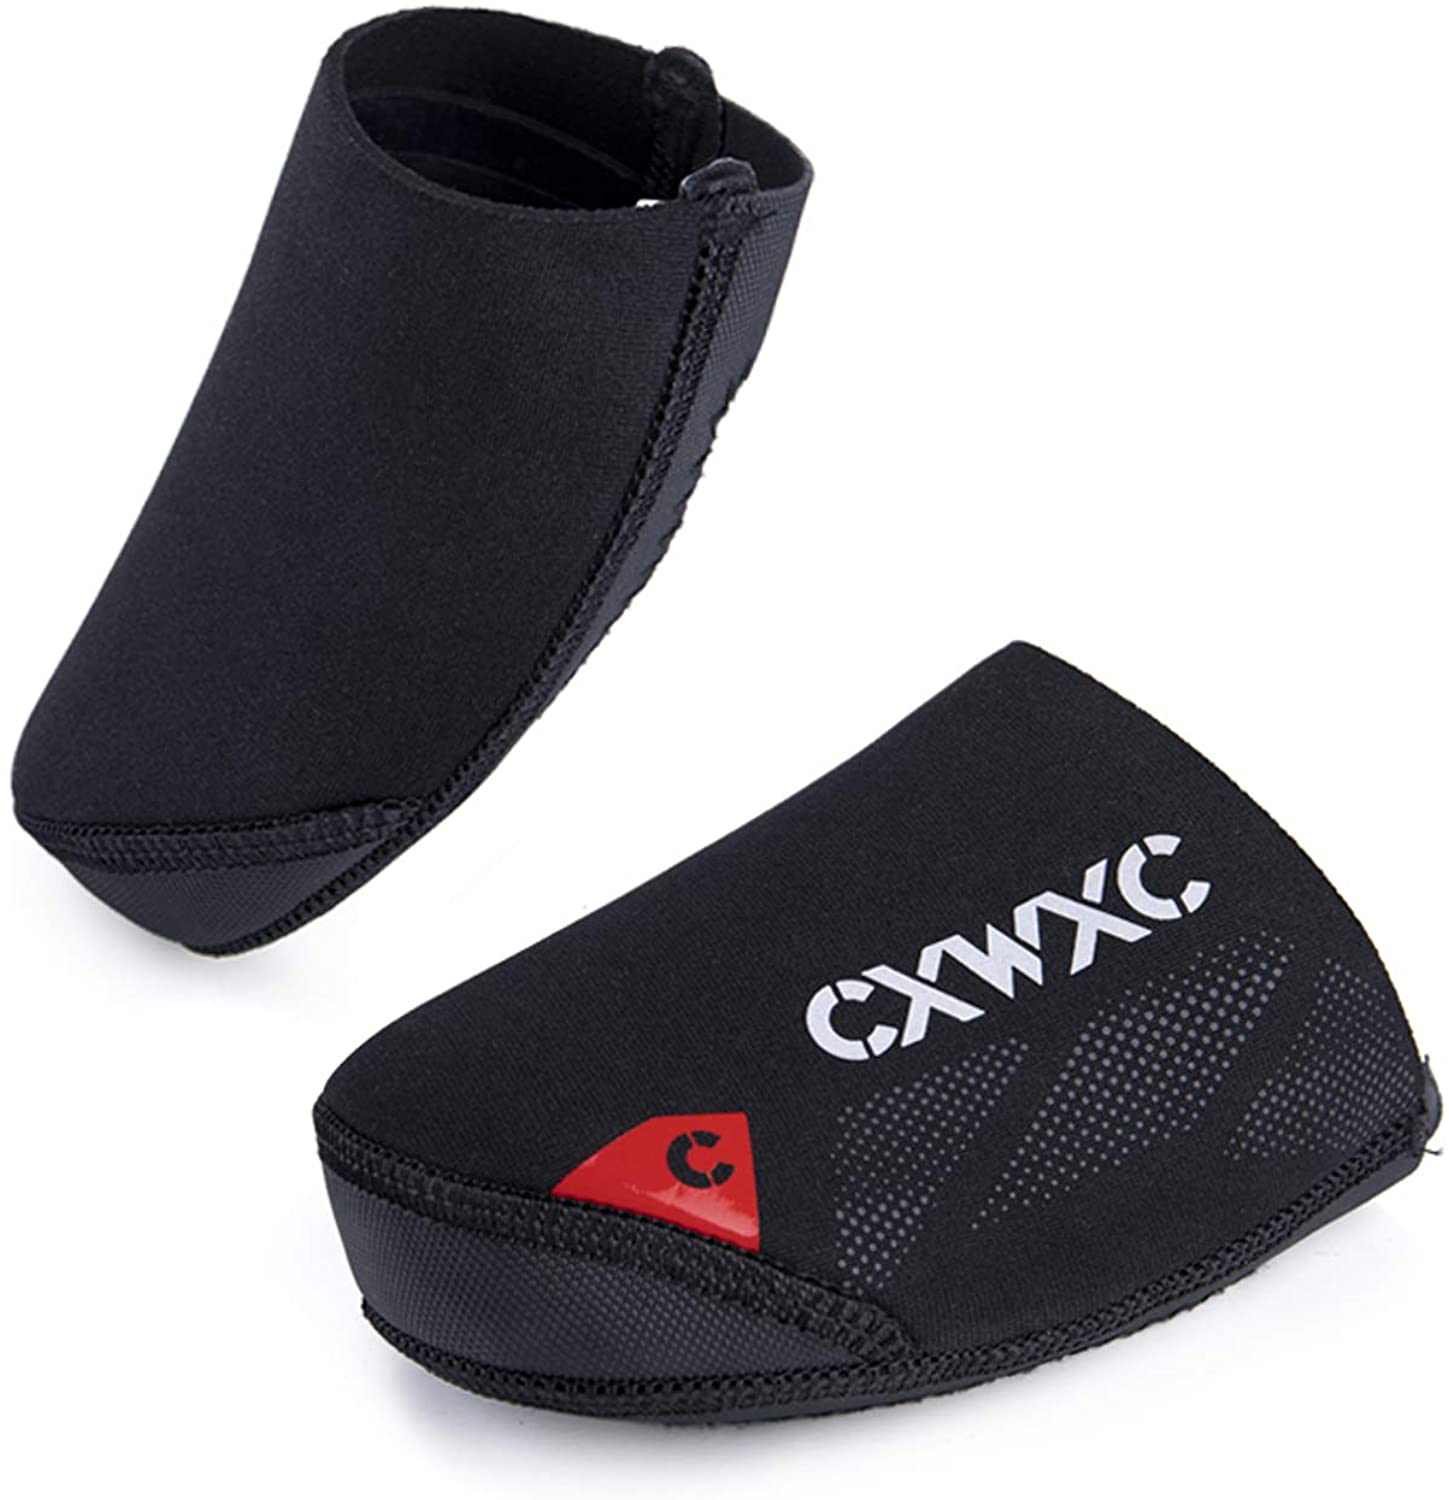 CXWXC Cycling Toe Covers for Men Women - Cycling Shoe Covers Winter Waterproof Breathable - Bike Overshoes Cold Weather Thermal Warm